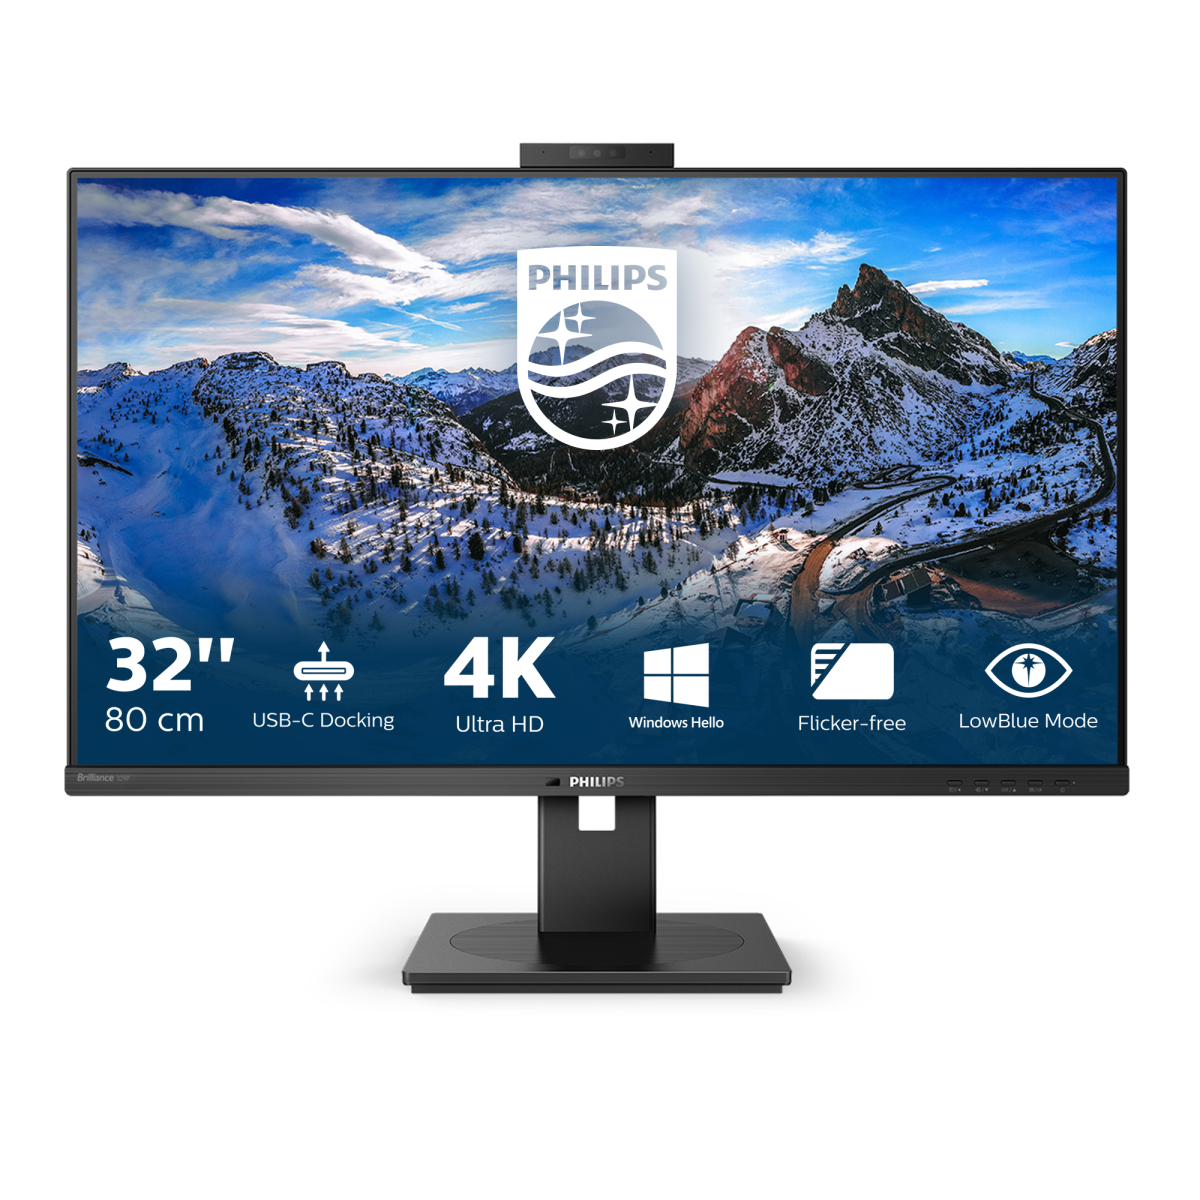 P Line LCD monitor with USB-C docking